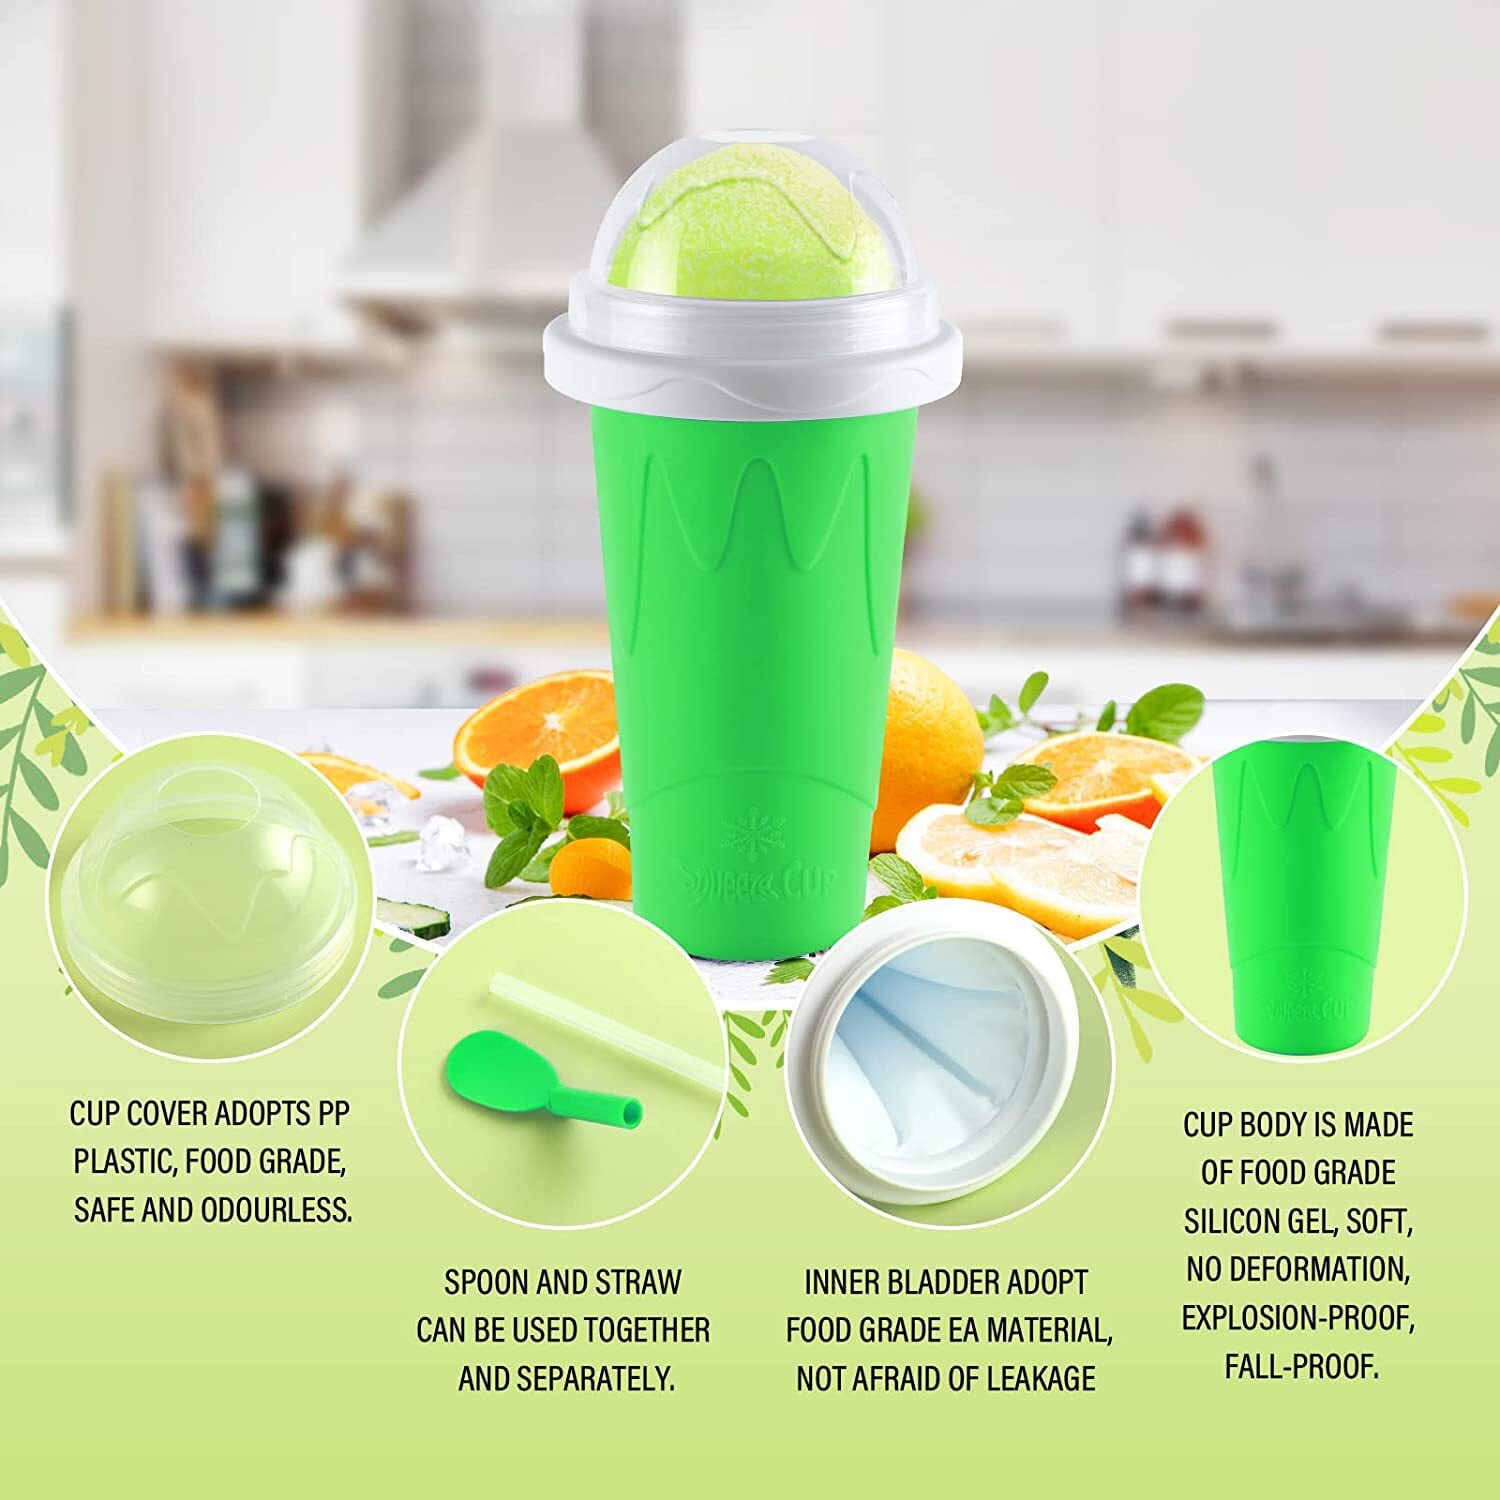 Funny Slushy Maker Cup 500ml Quick-Frozen Squeeze Smoothies Cup Homemade  Magic Ice Maker Bottle With Straw - Buy Funny Slushy Maker Cup 500ml  Quick-Frozen Squeeze Smoothies Cup Homemade Magic Ice Maker Bottle